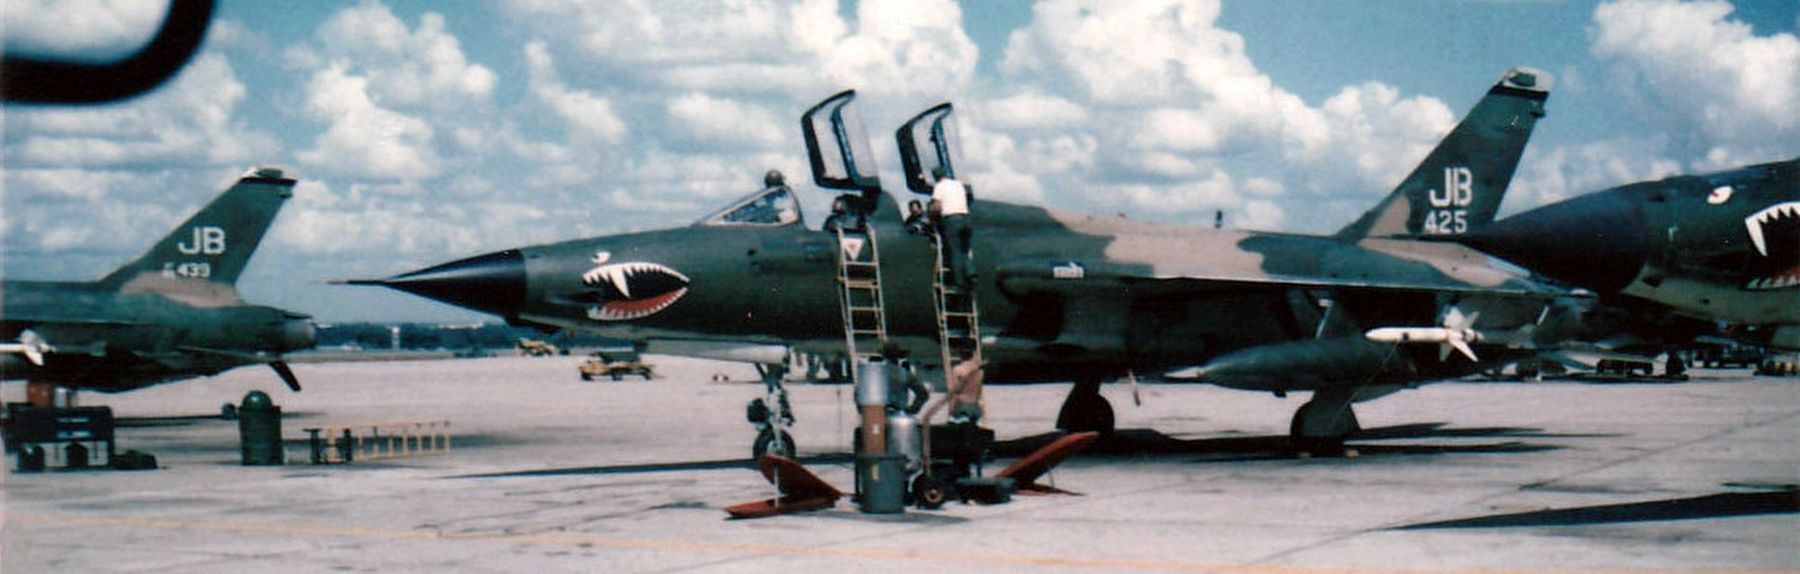 USAF Republic F-105G Thunderchief Wild Weasel image. Click for full size.